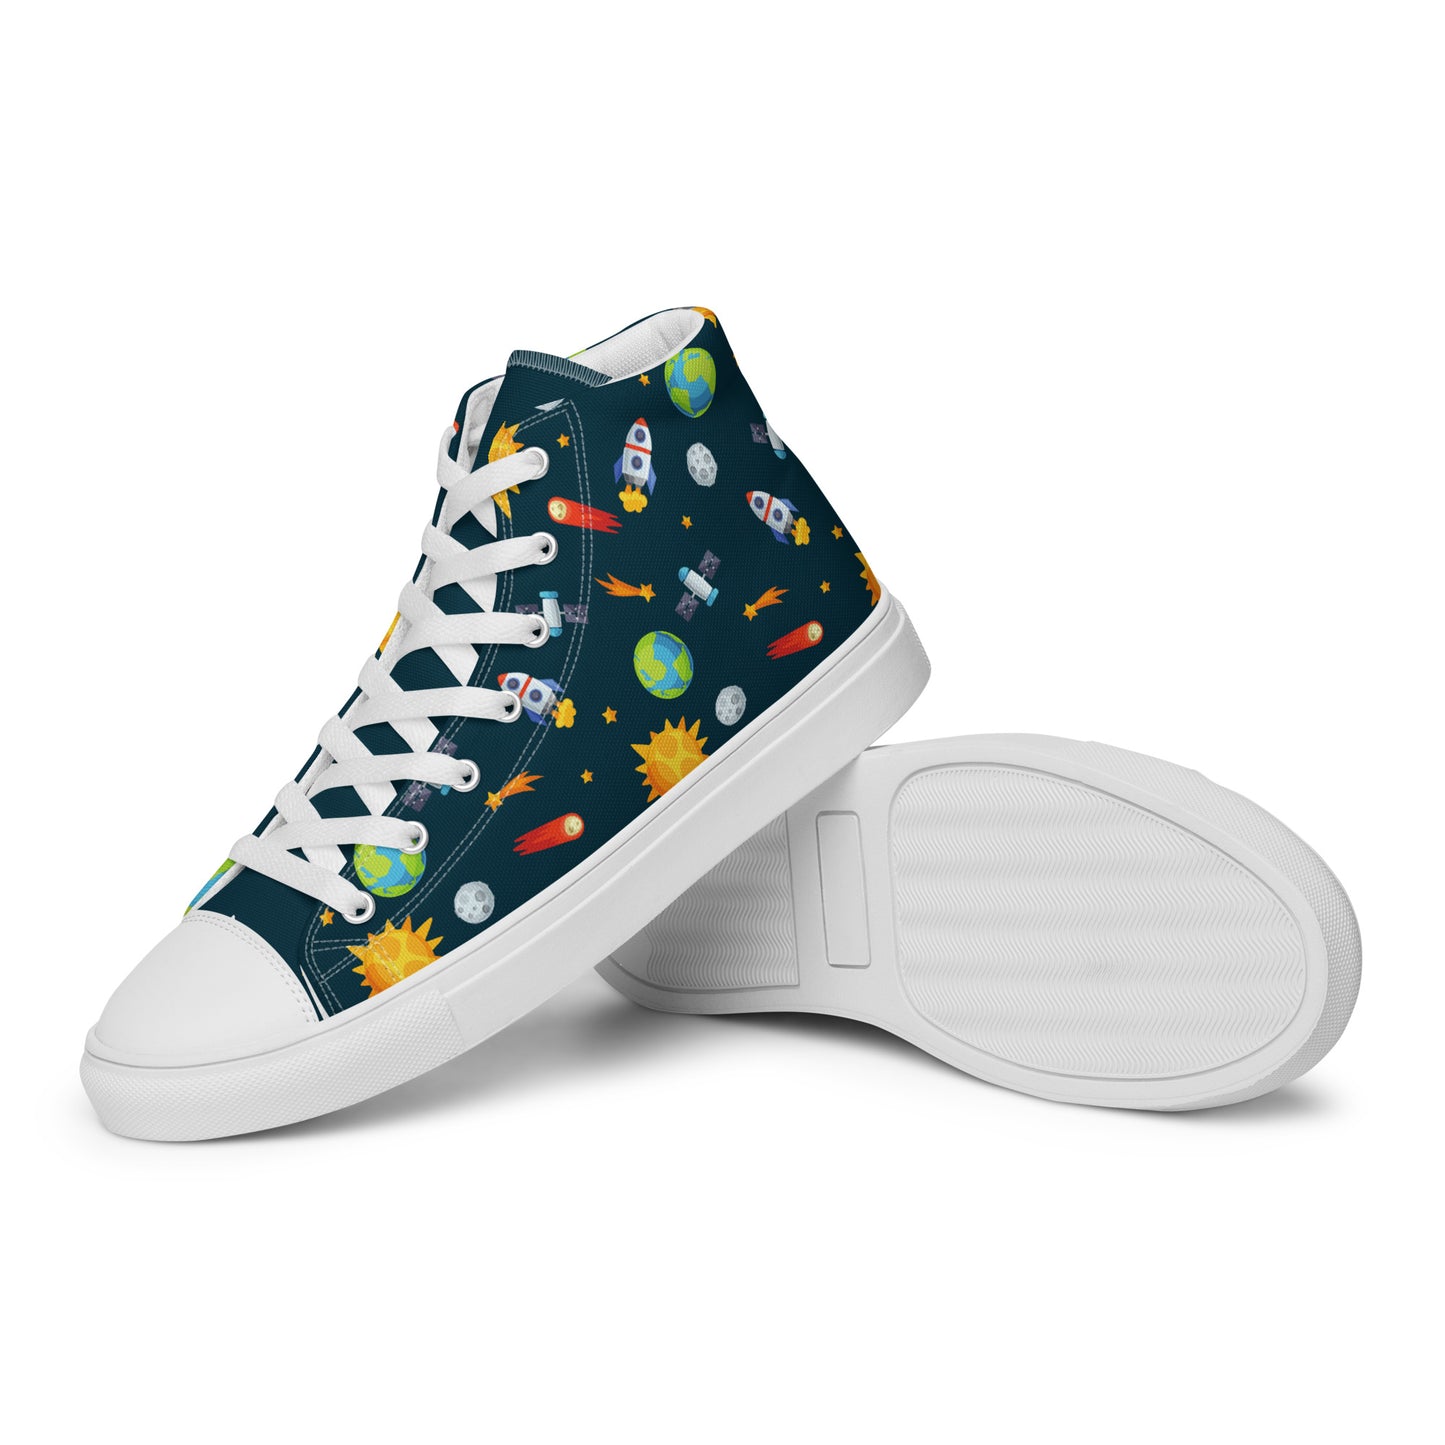 Busy Space - Men’s high top canvas shoes Mens High Top Shoes Outside Australia